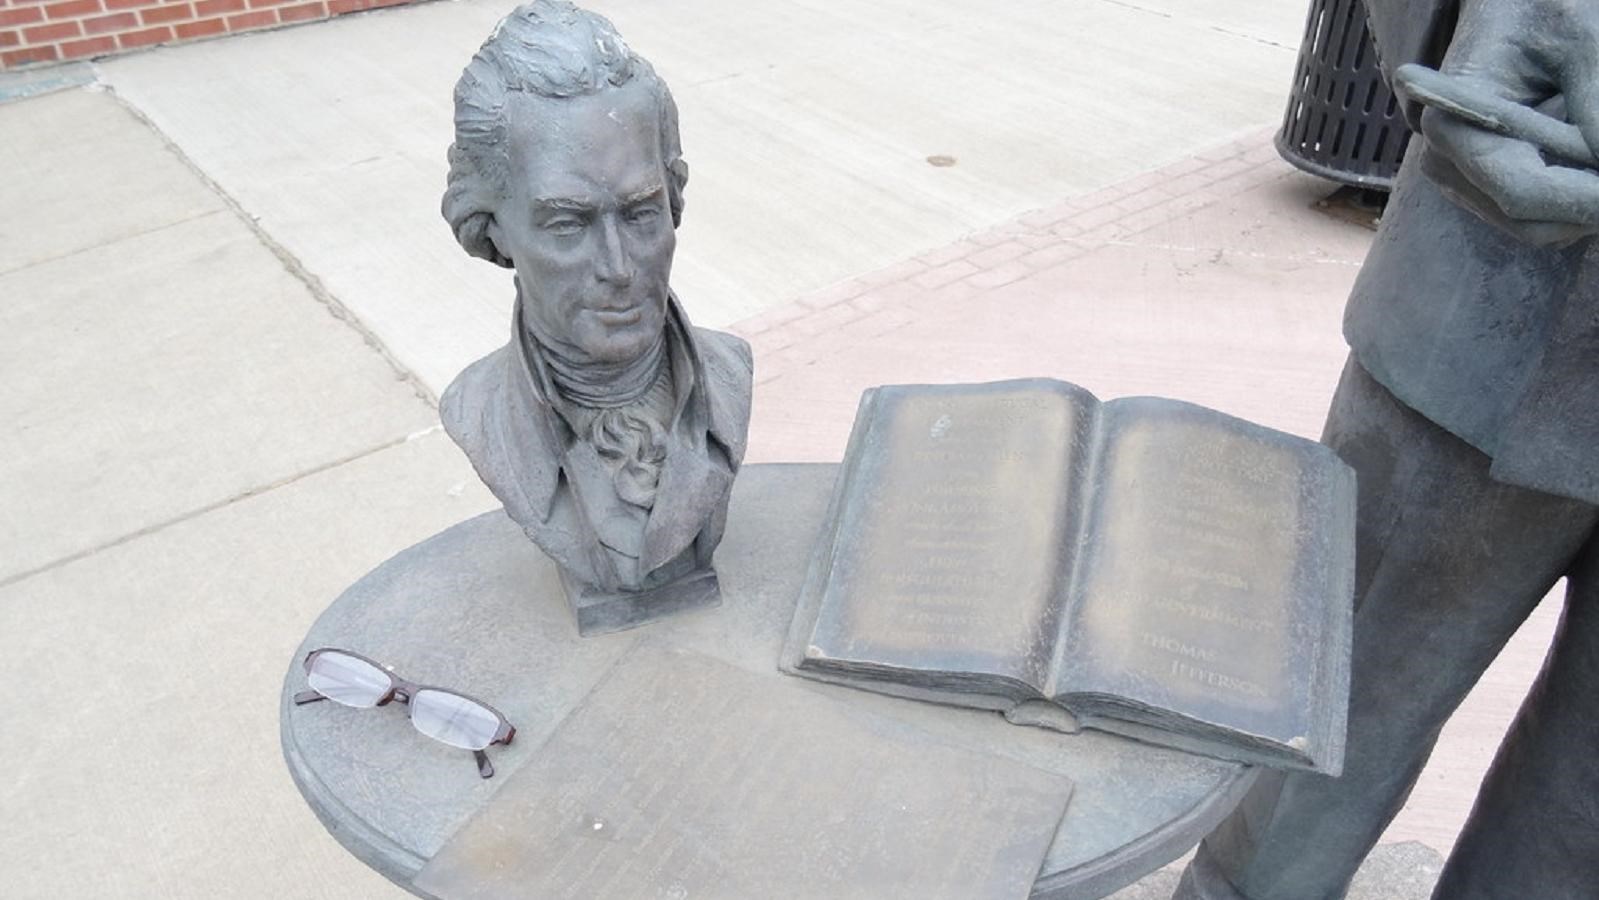 A bronze statue consisting of a bust, book, and pair of glasses on a table.